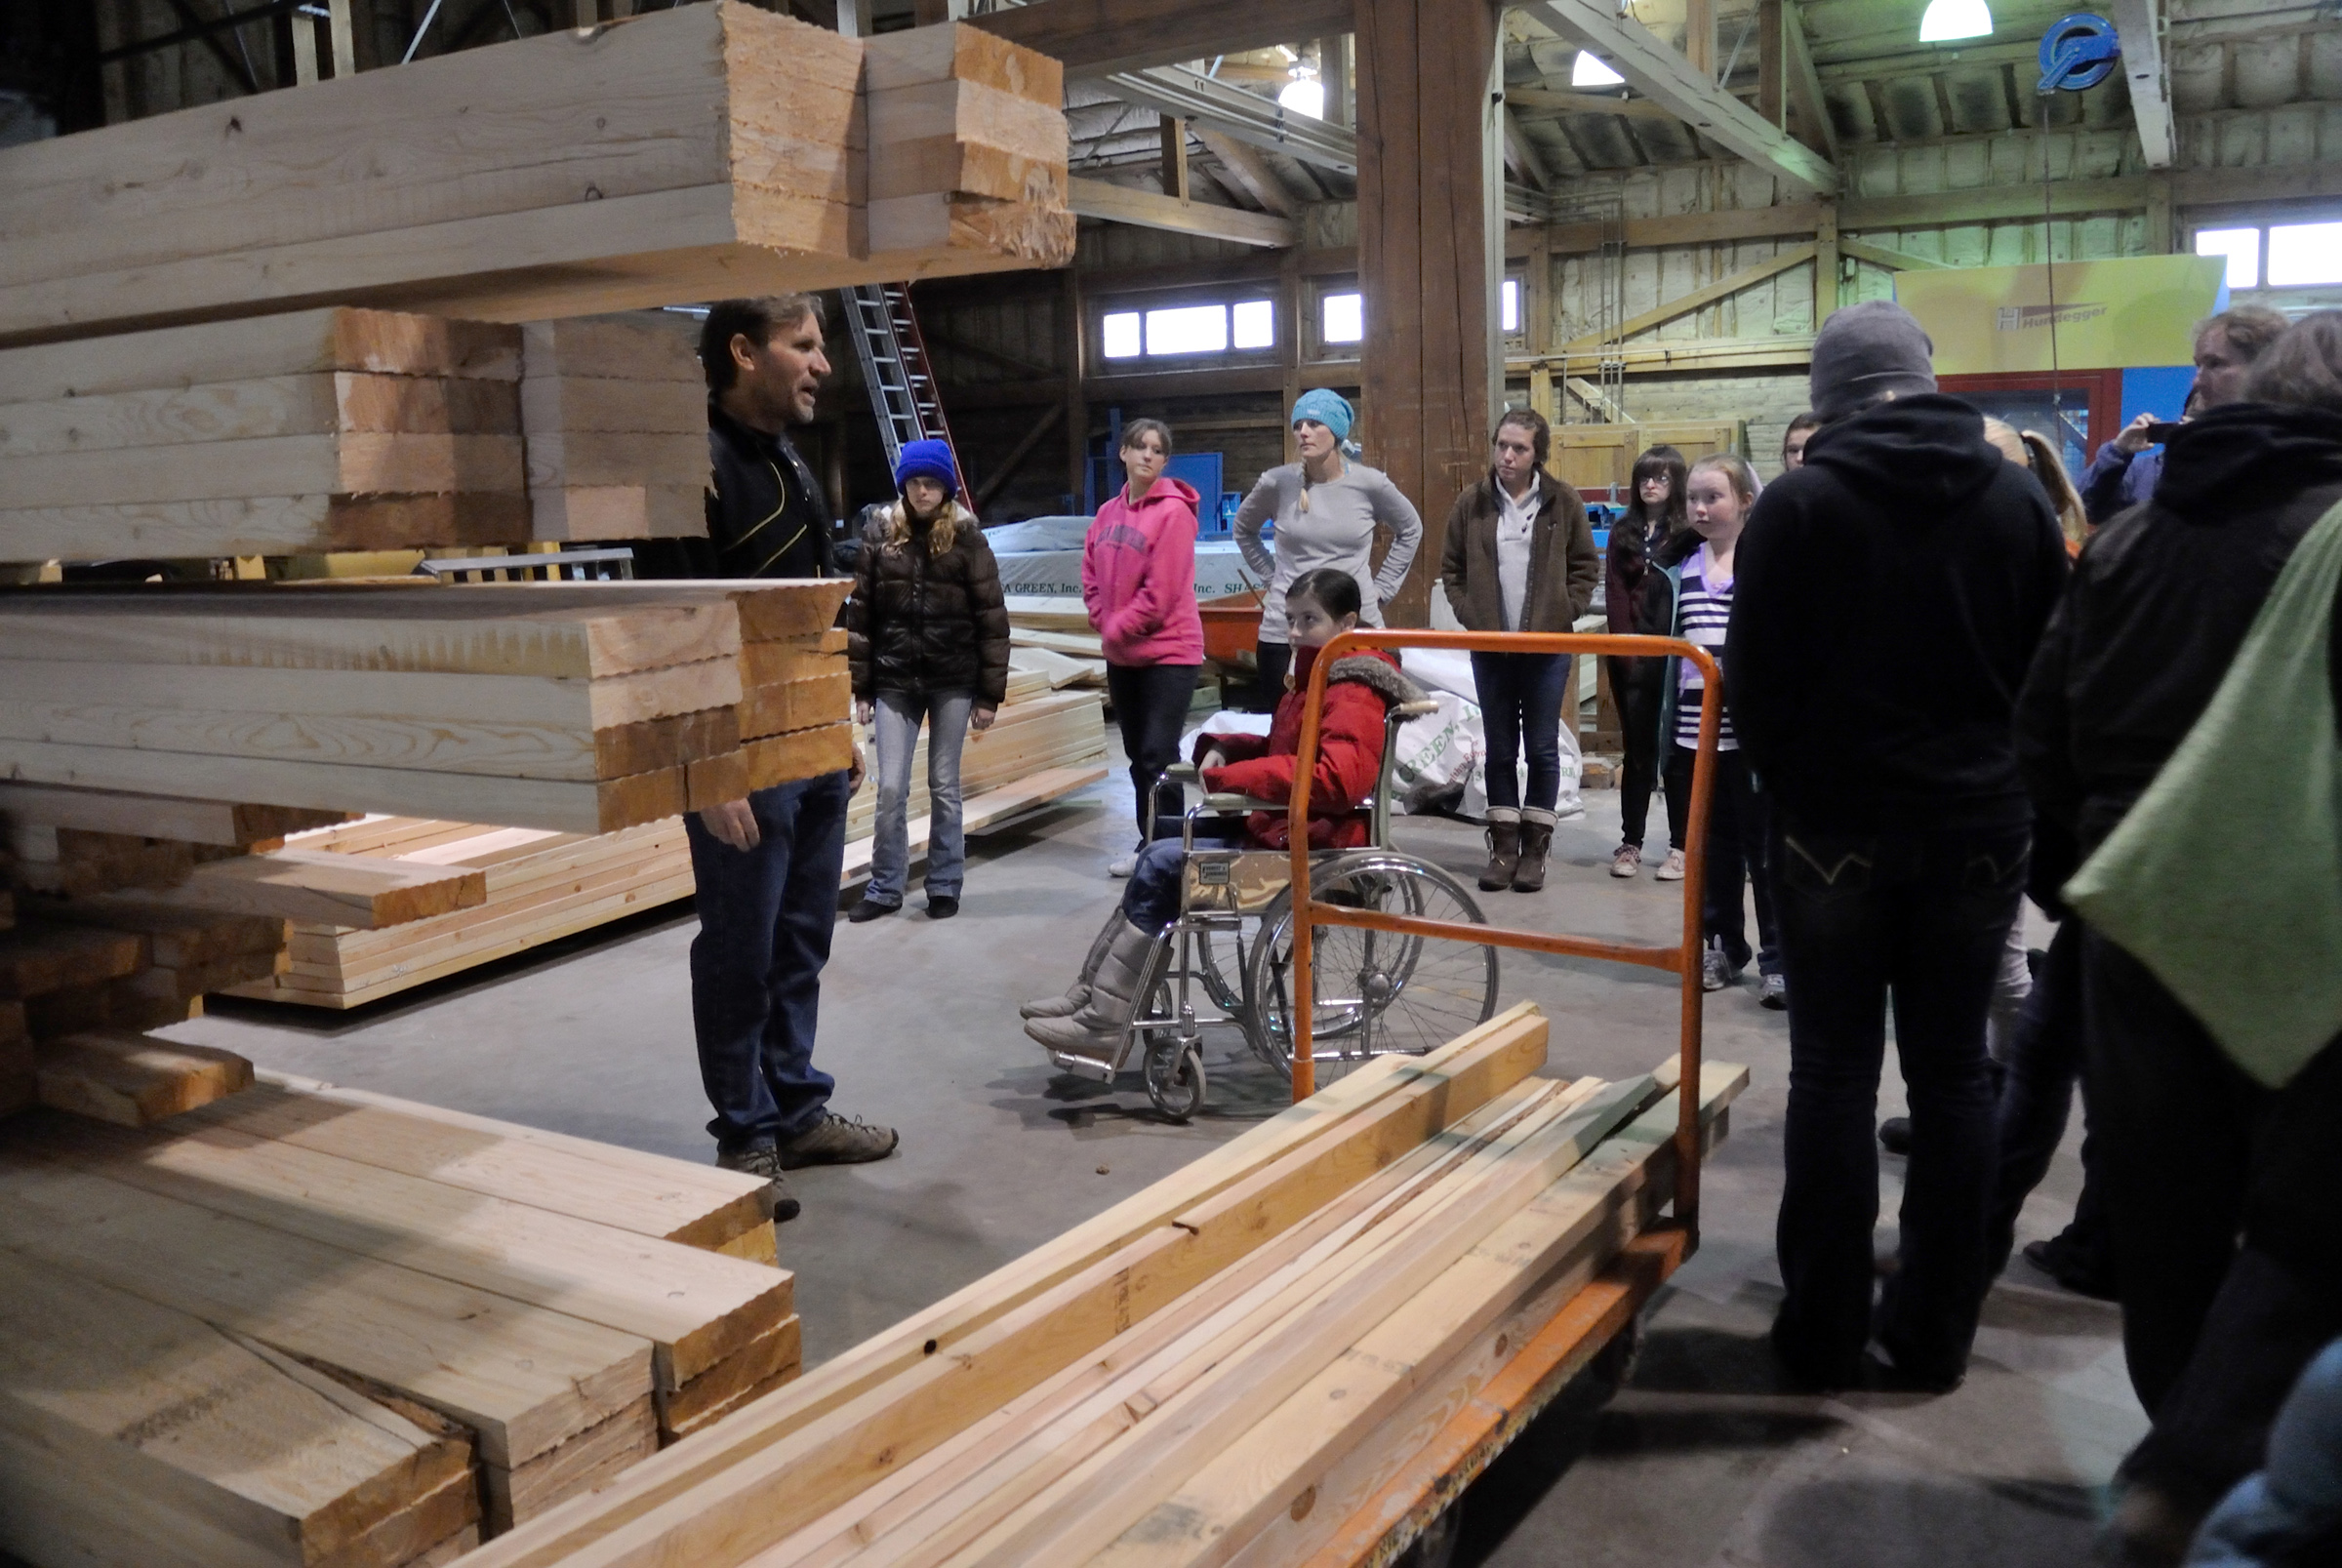 Girl Scouts tour Euclid Timber Frames, a partner on the project and which produces lumber from beetle-kill wood that will be used in the cabins at Trefoil Ranch.